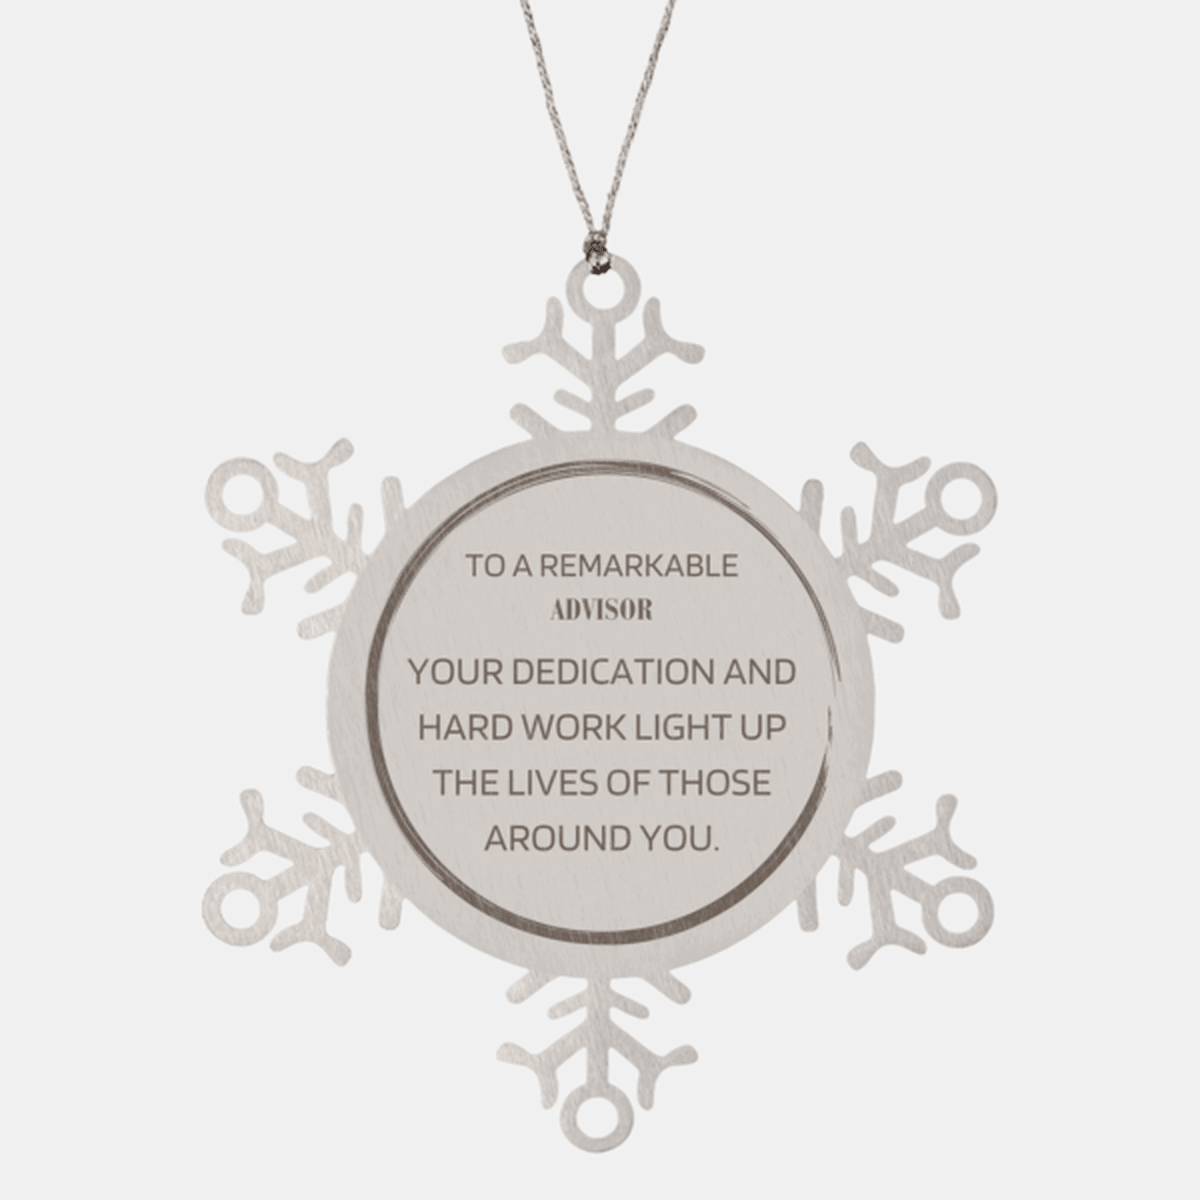 Remarkable Advisor Gifts, Your dedication and hard work, Inspirational Birthday Christmas Unique Snowflake Ornament For Advisor, Coworkers, Men, Women, Friends - Mallard Moon Gift Shop